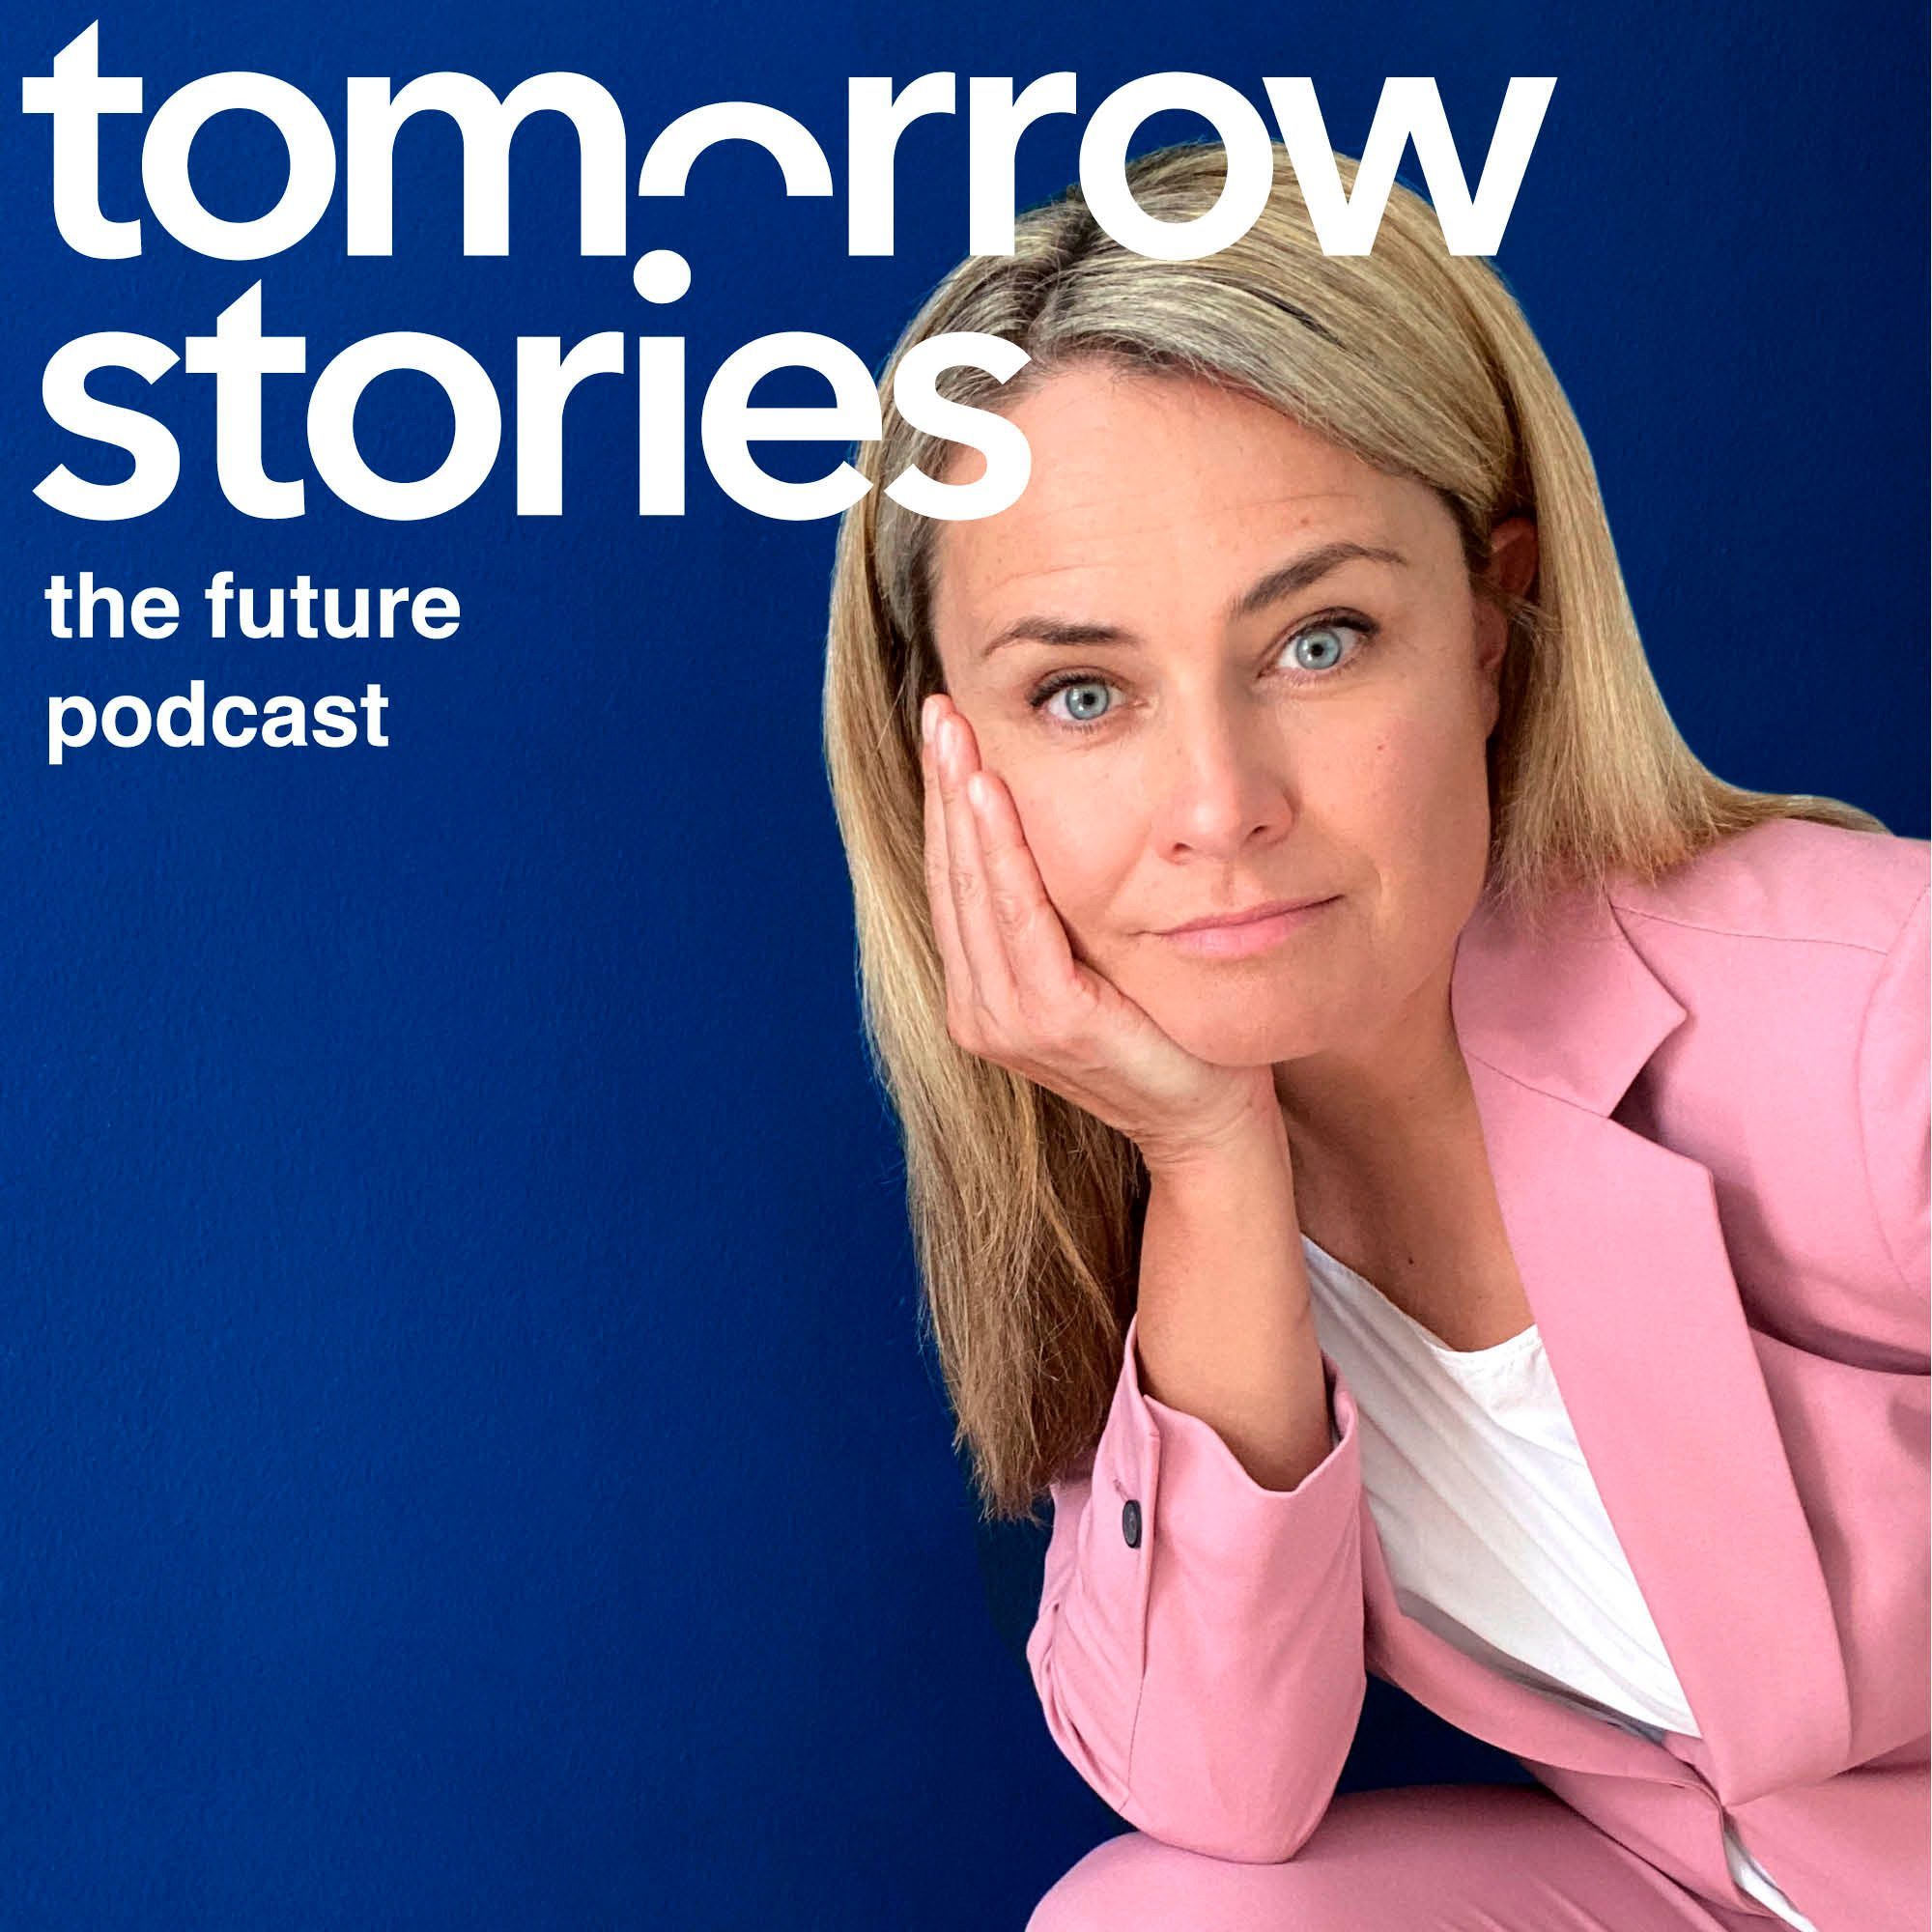 tomorrowstories-podcast